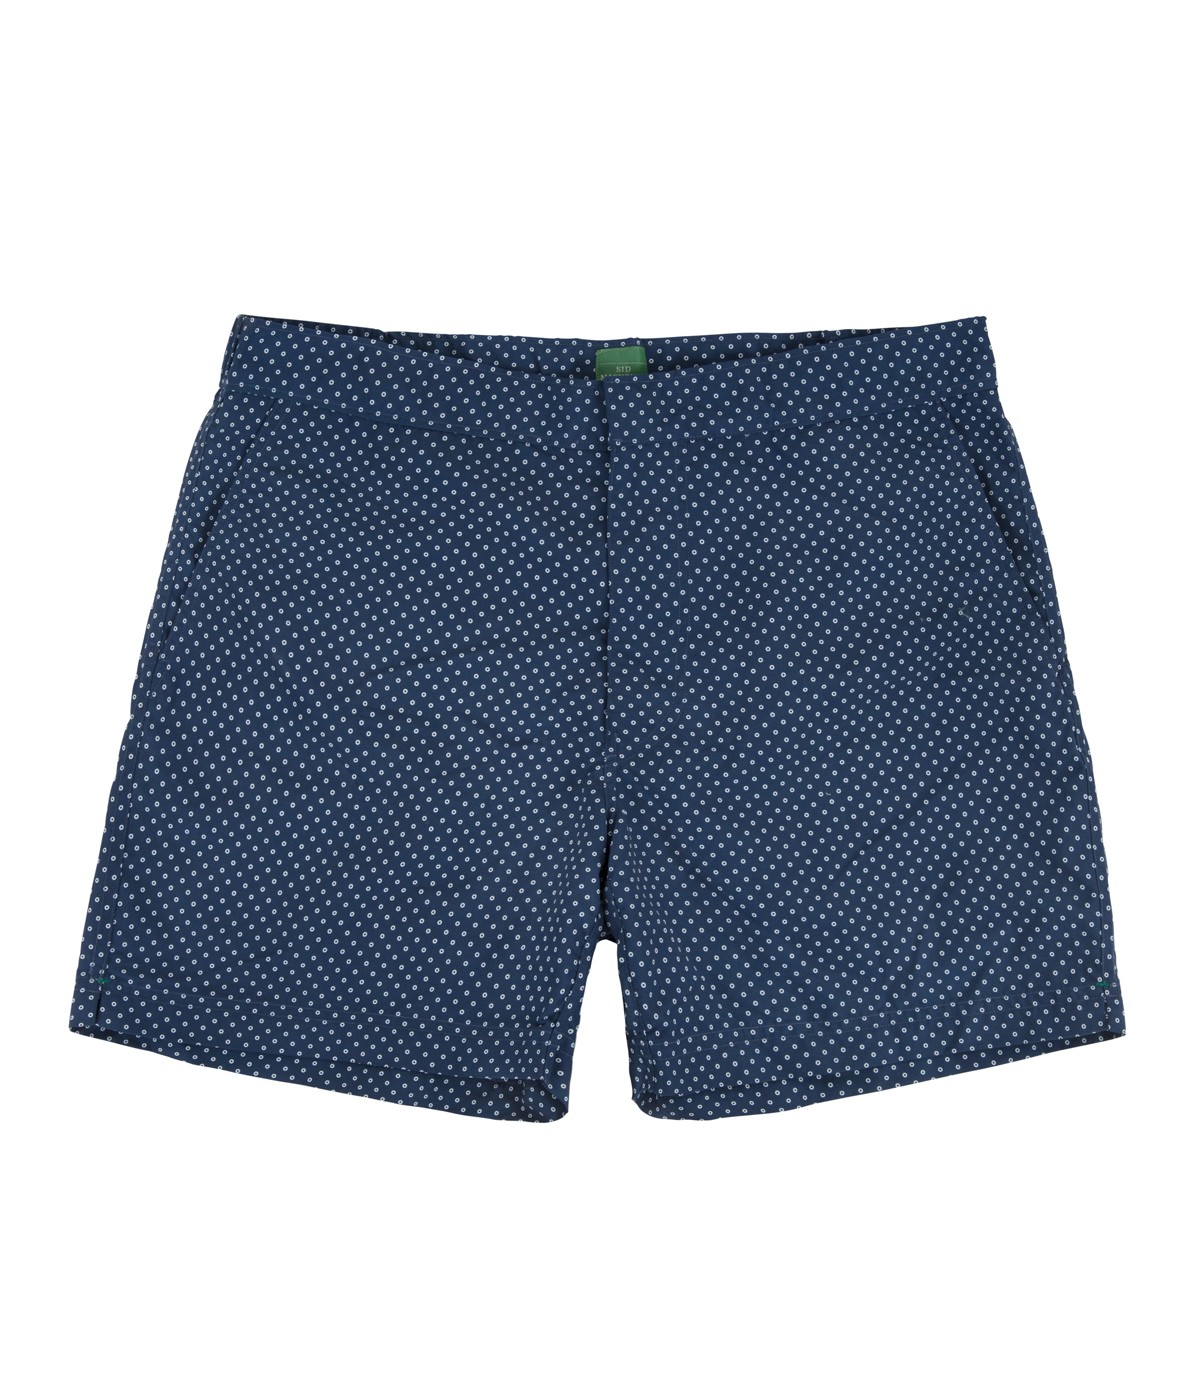 5 Essential Swim Trunks You Need For Summer - Maxim